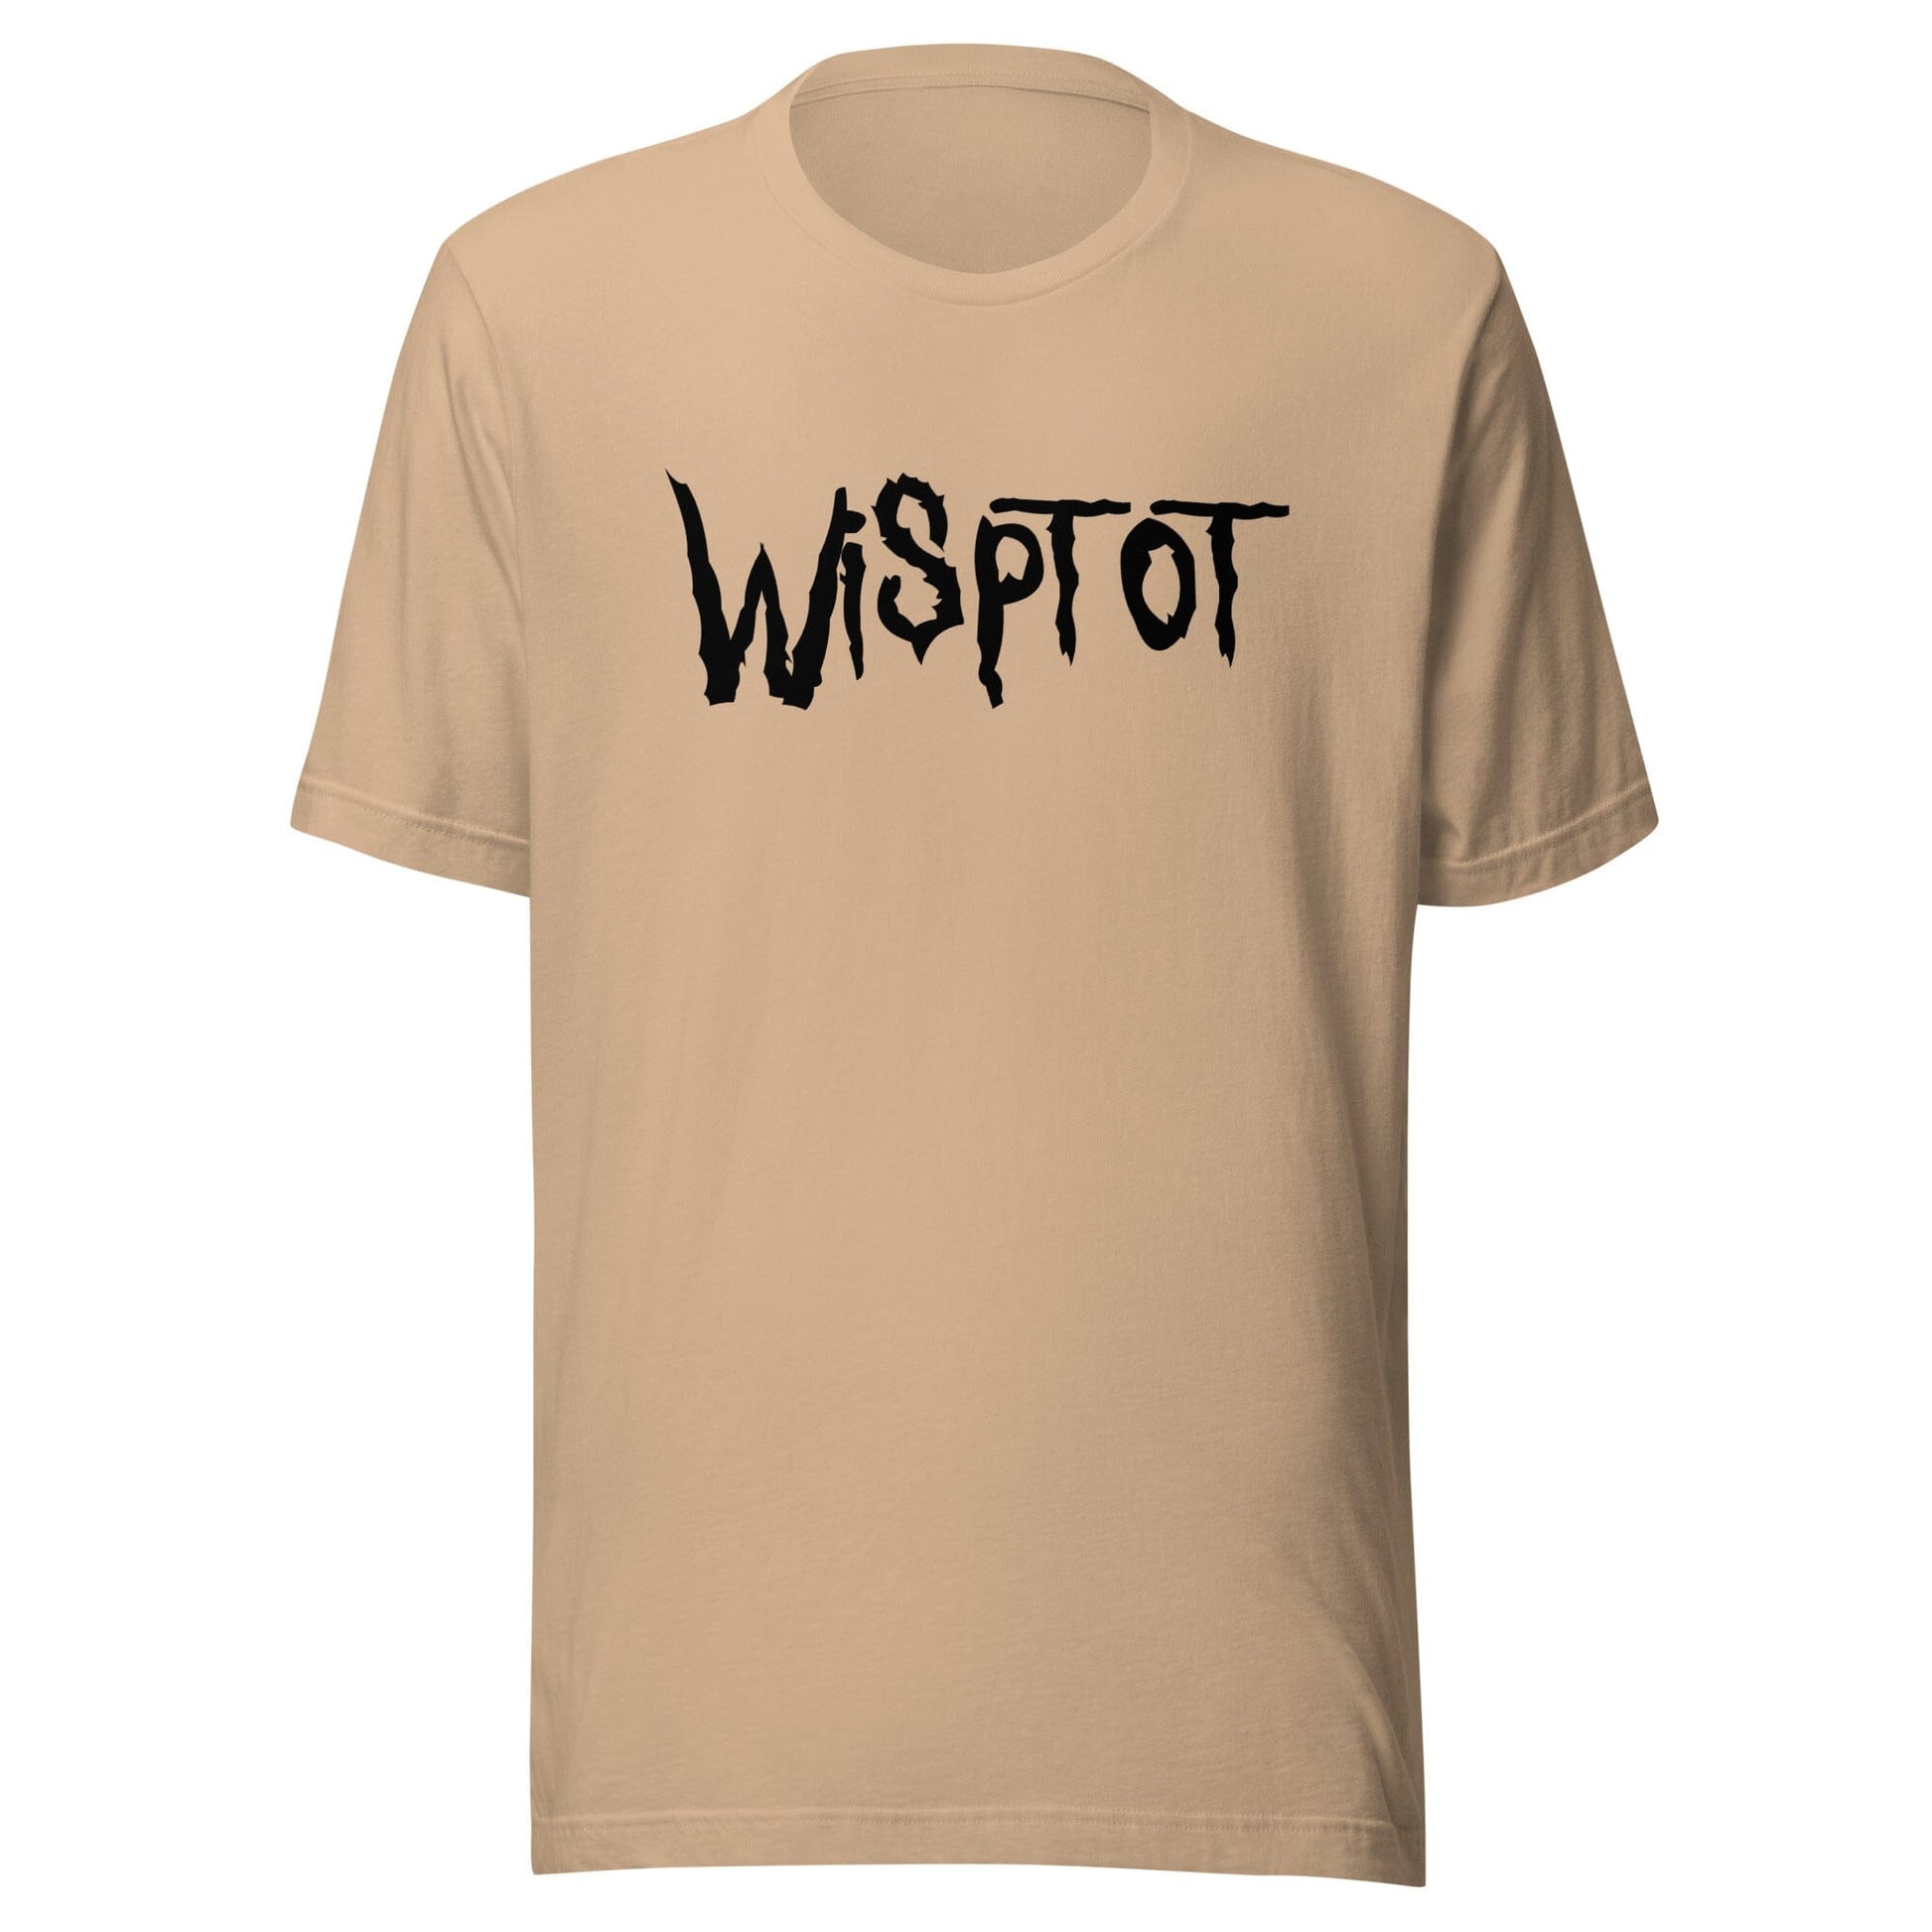 WispTot T-Shirt (Extended Sizing) [Unfoiled] (All net proceeds go to equally to Kitty CrusAIDe and Rags to Riches Animal Rescue) JoyousJoyfulJoyness Tan 3XL 